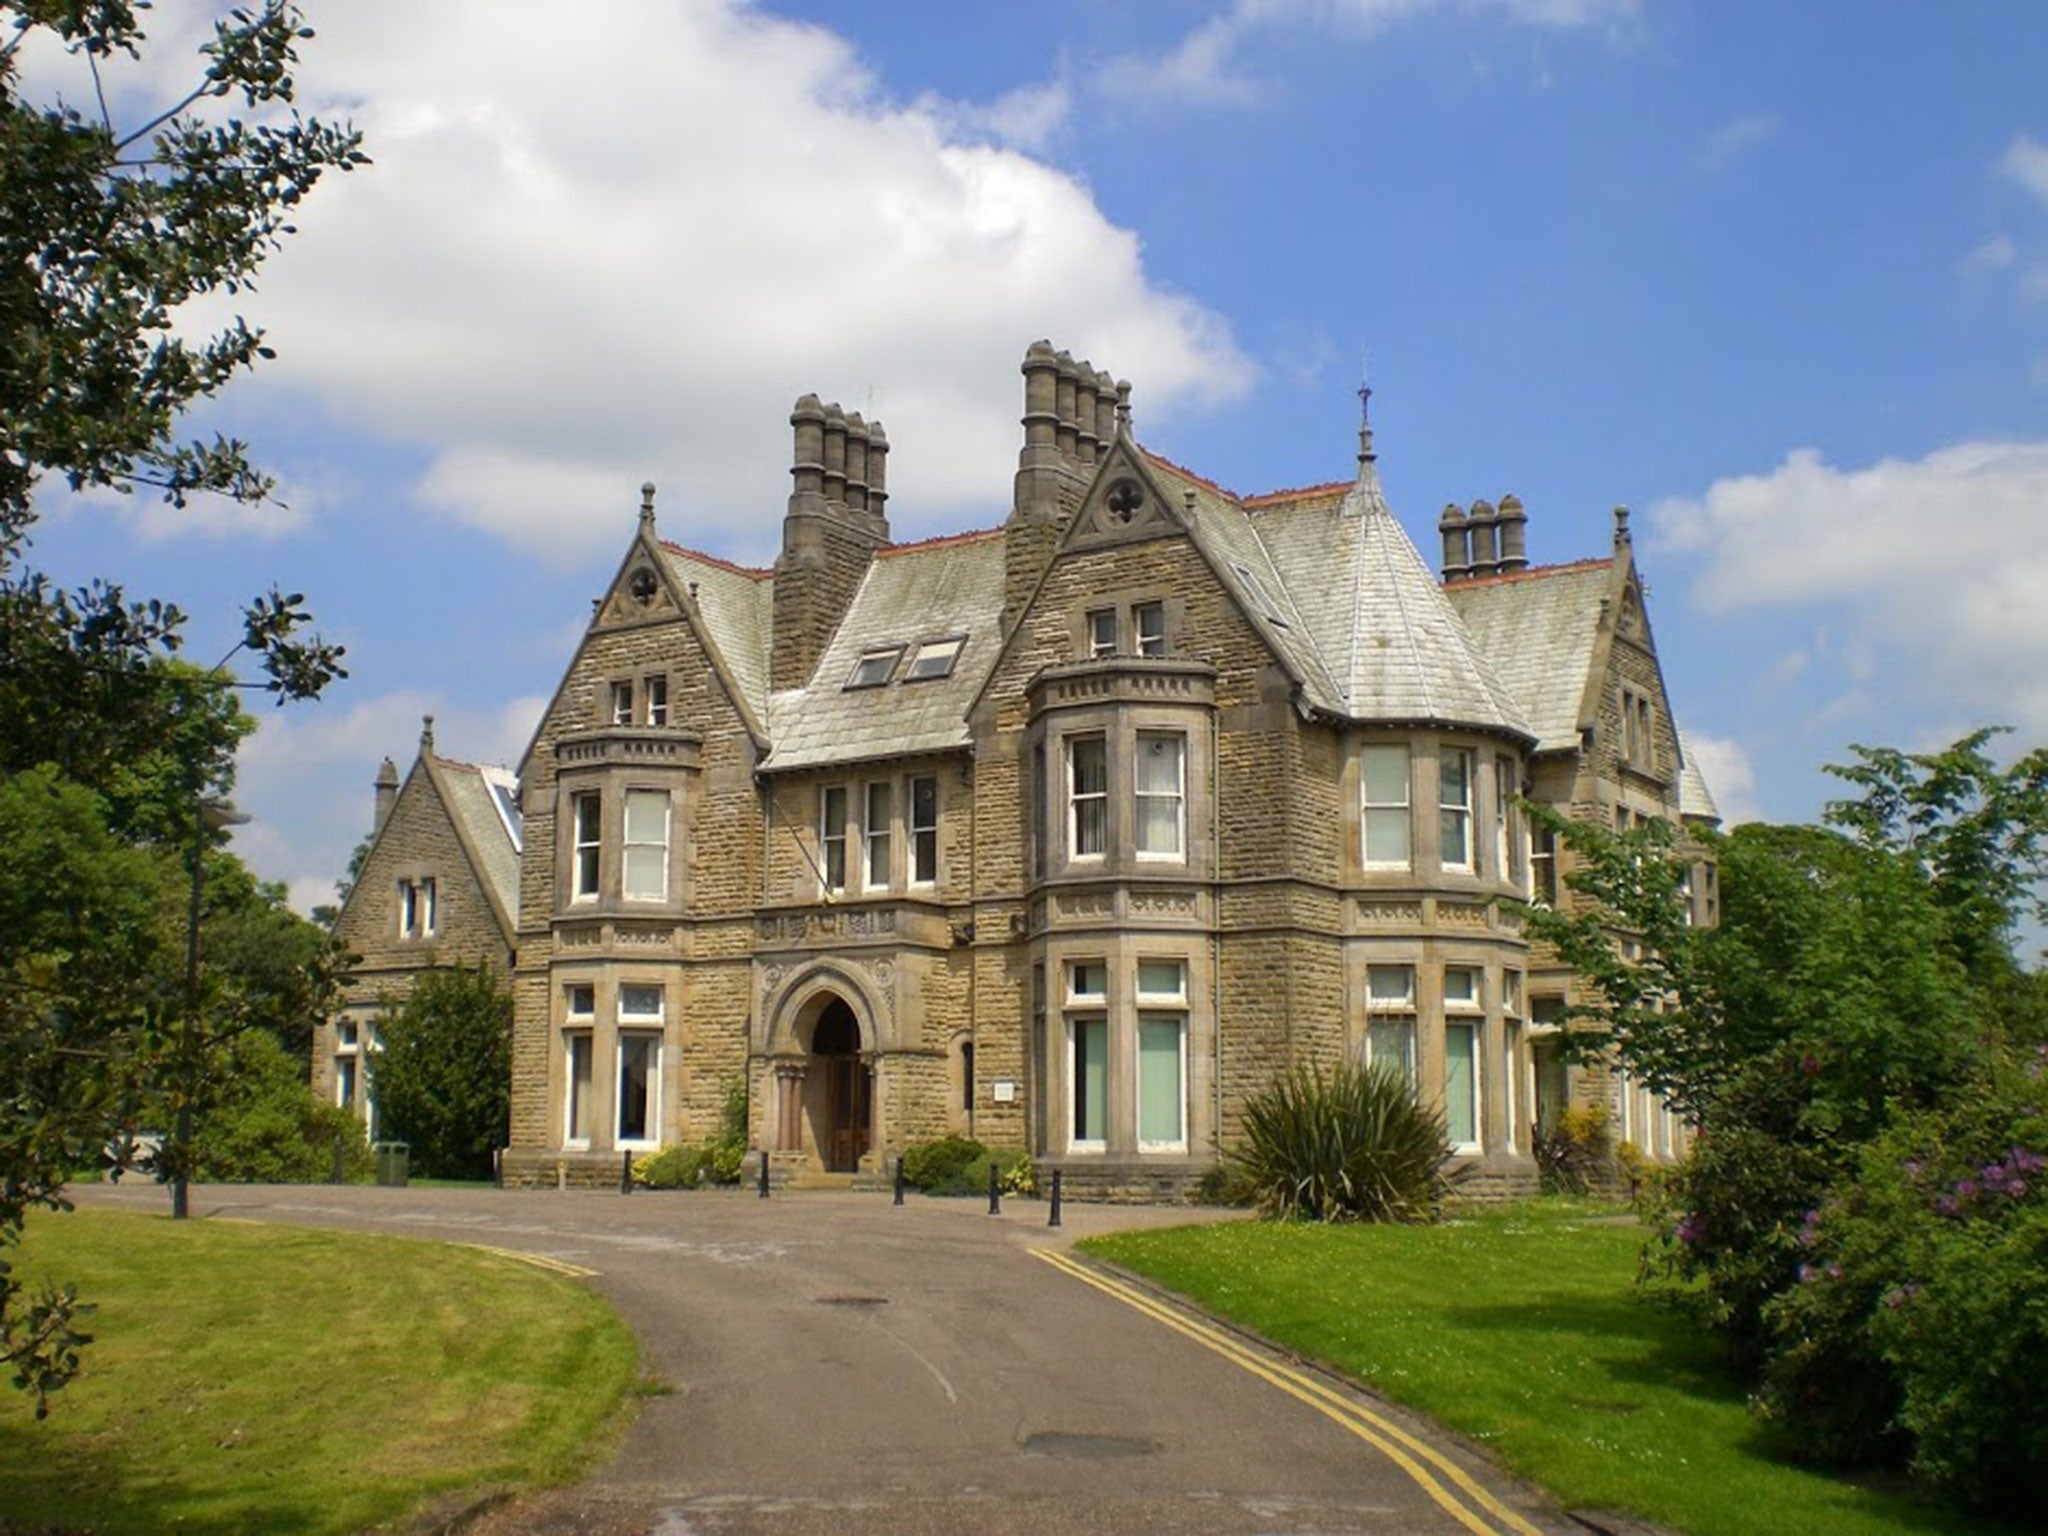 Spenfield House in Far Headingley, Leeds, has been highlighted by the Victorian Society for its ‘exceptional interiors’